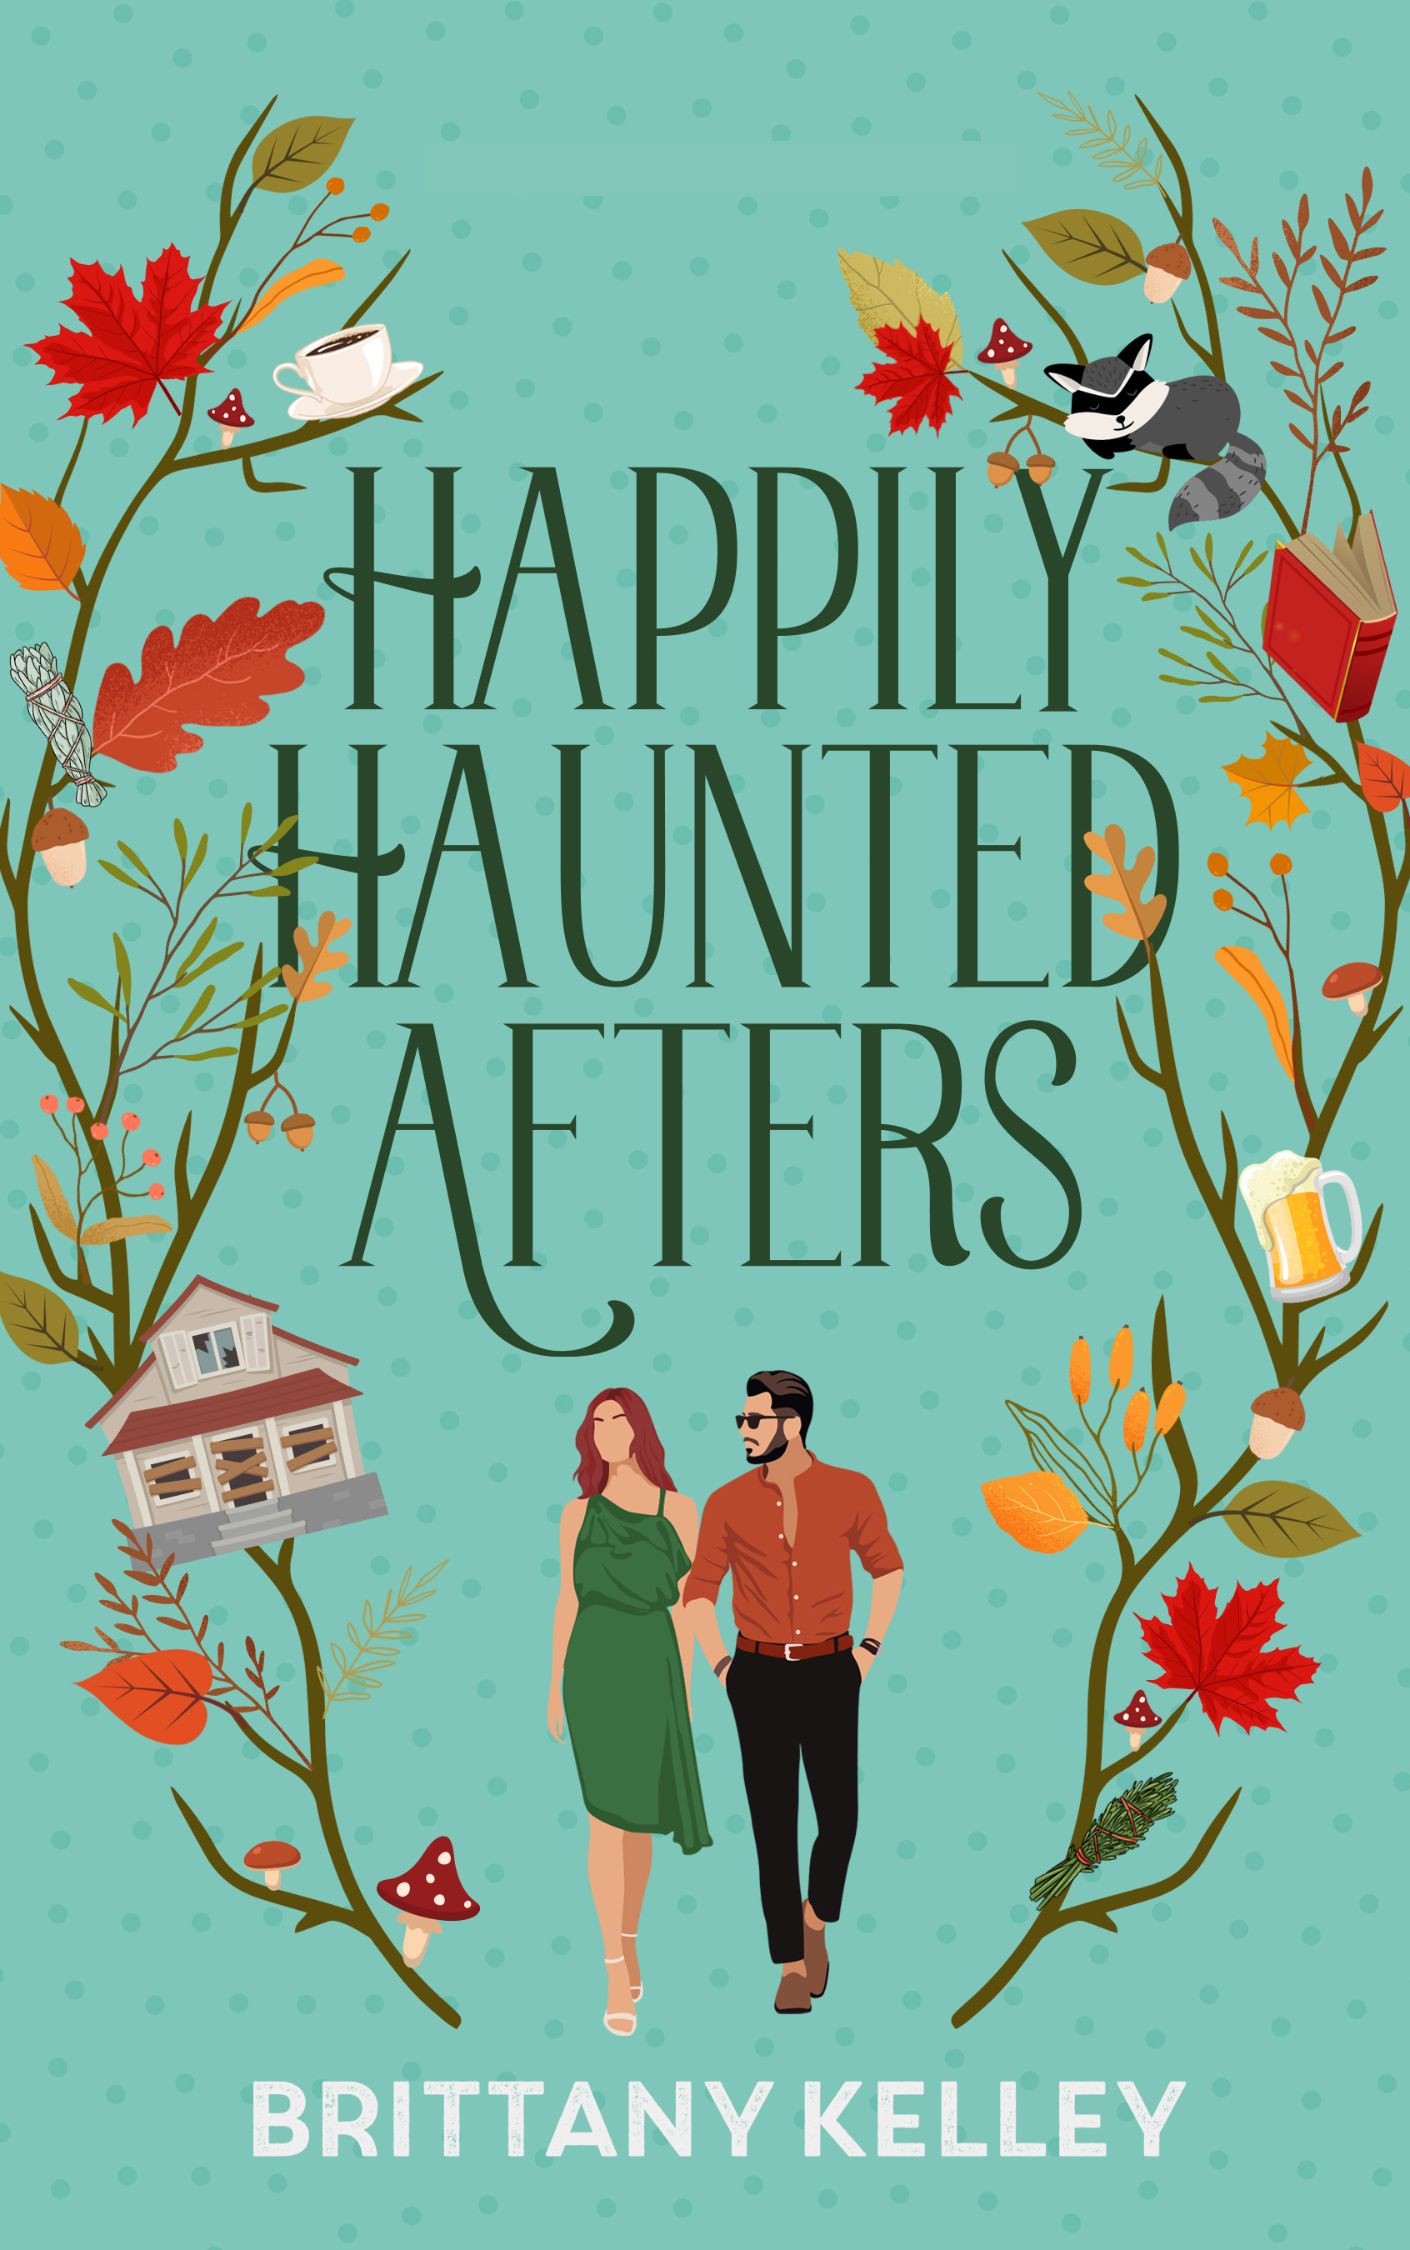 Happily Haunted Afters by Brittany Kelley PDF Download